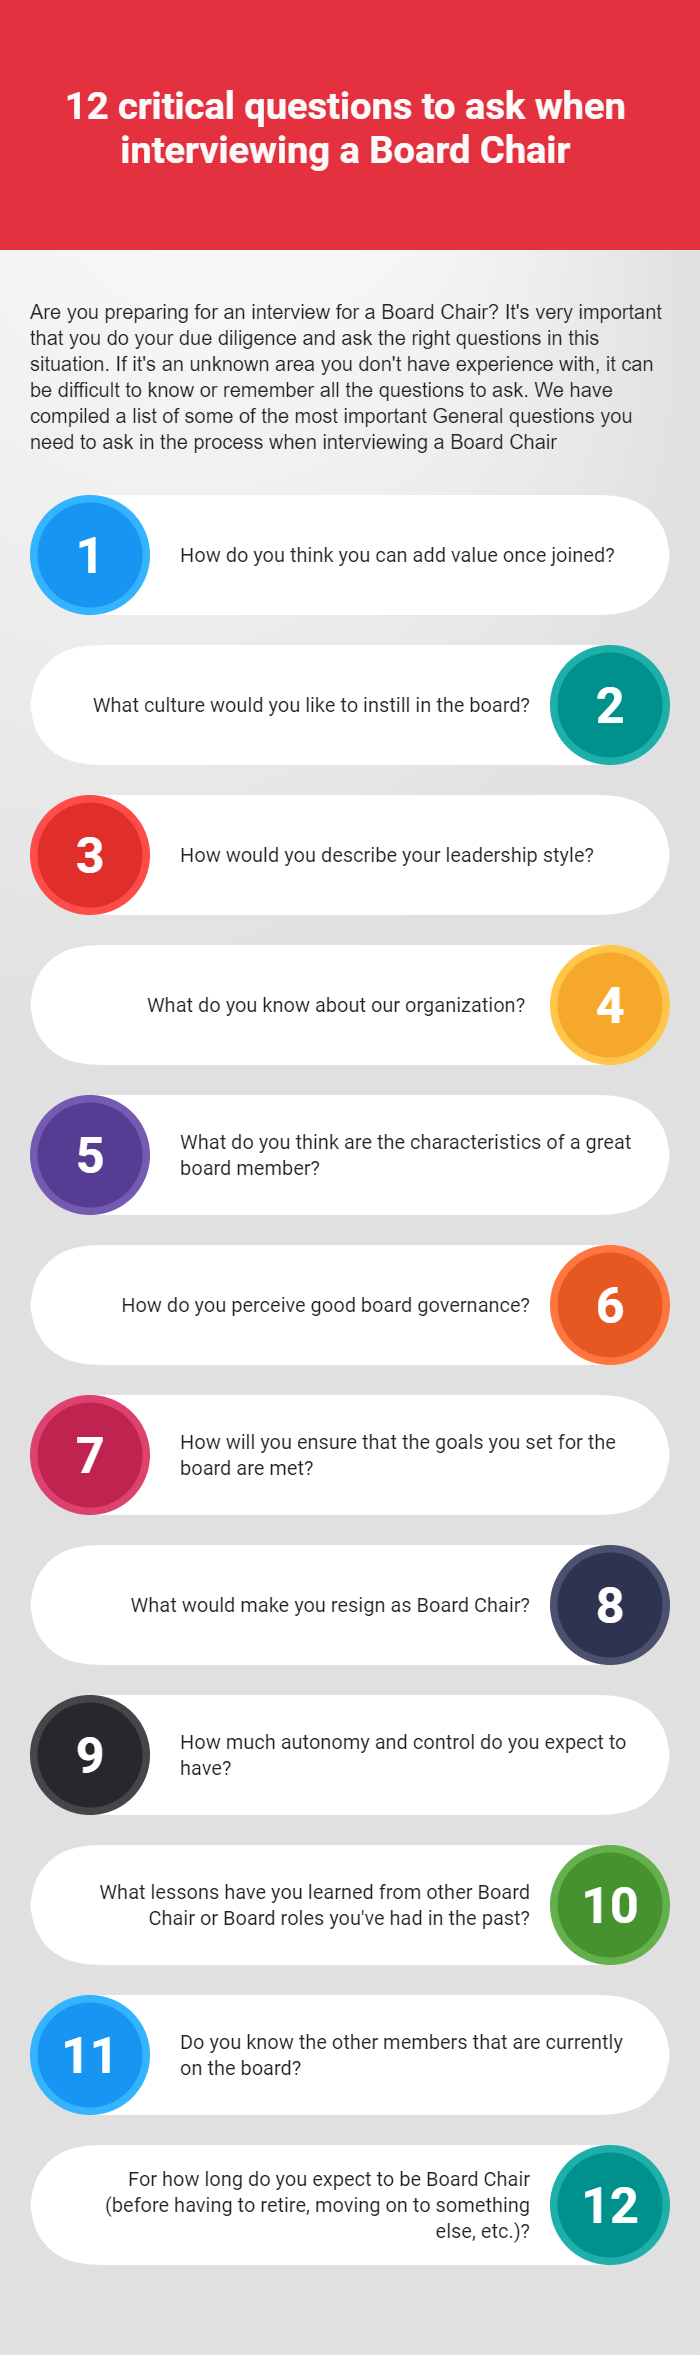 12 critical questions to ask when interviewing a Board Chair